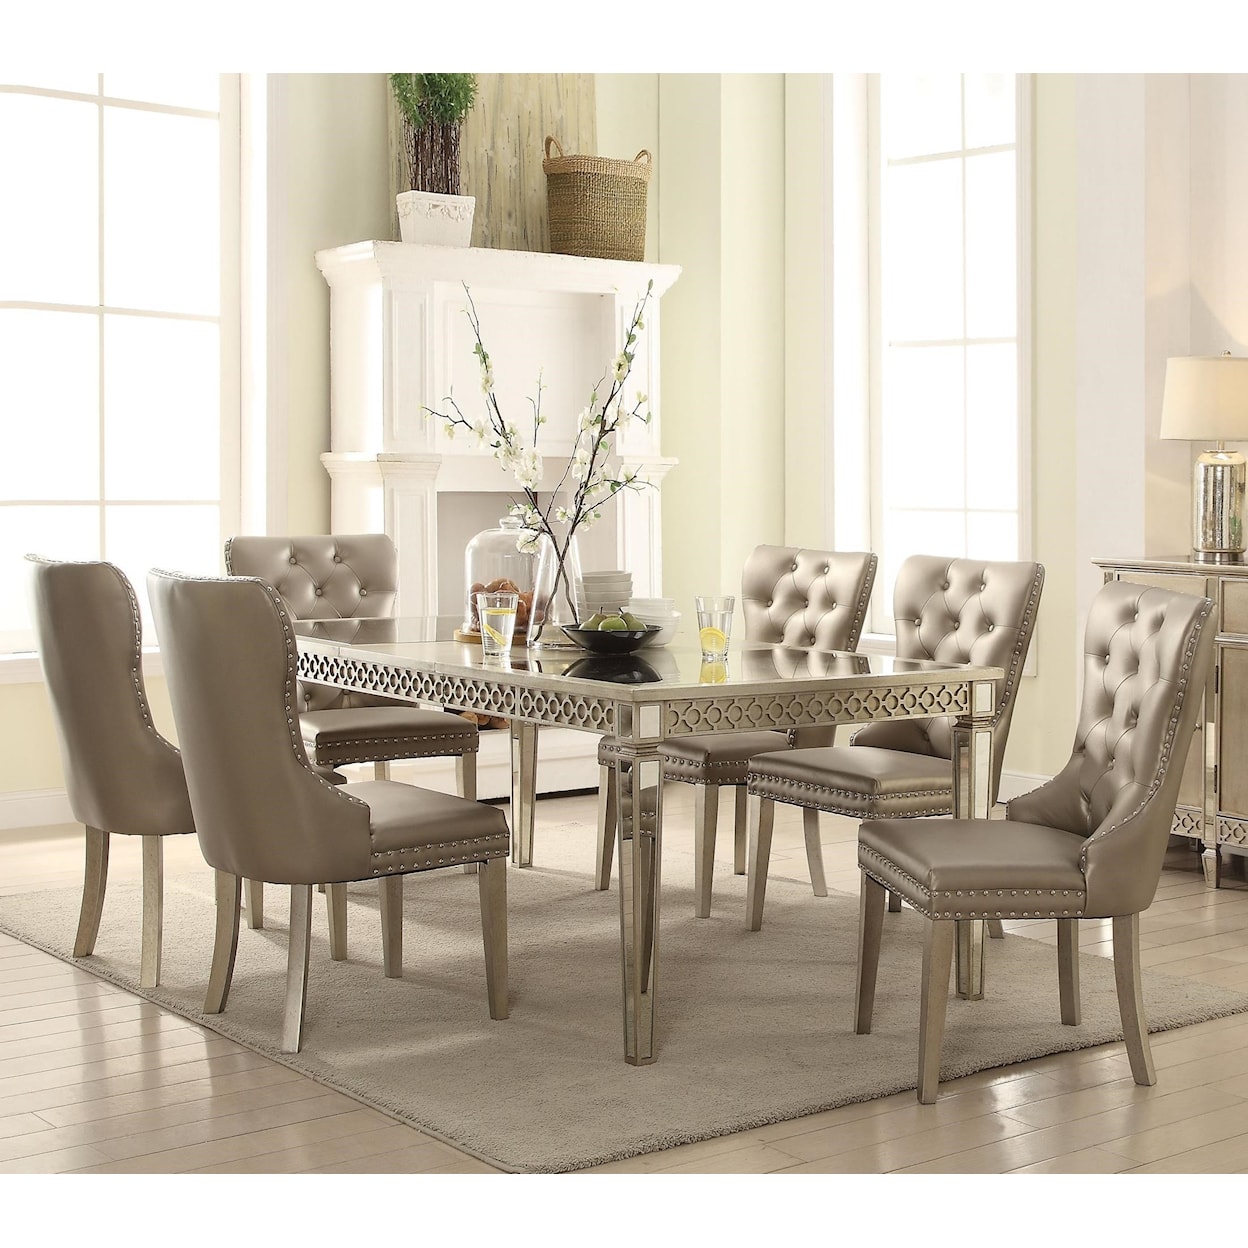 Acme Furniture Kacela Dining Set with 6 Chairs